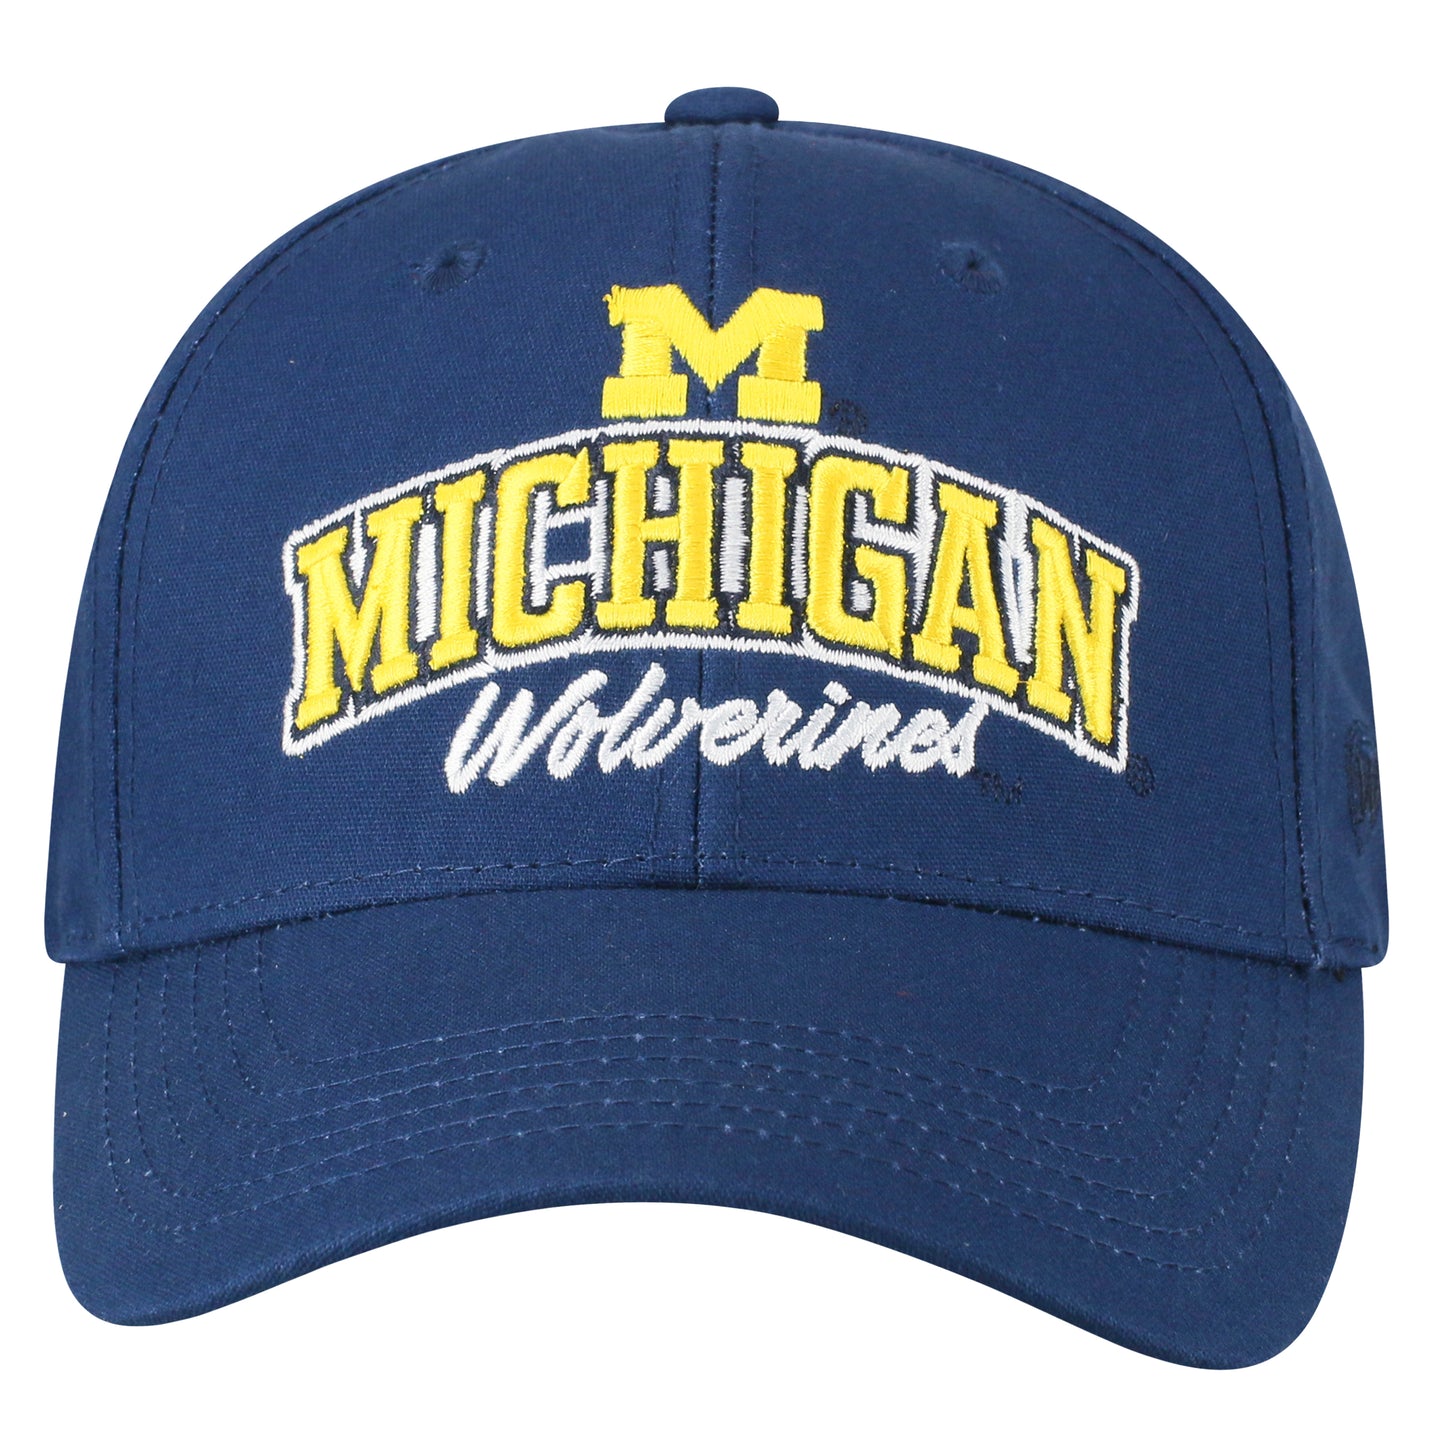 Mens Michigan Wolverines Advisor Adjustable Hat By Top Of The World